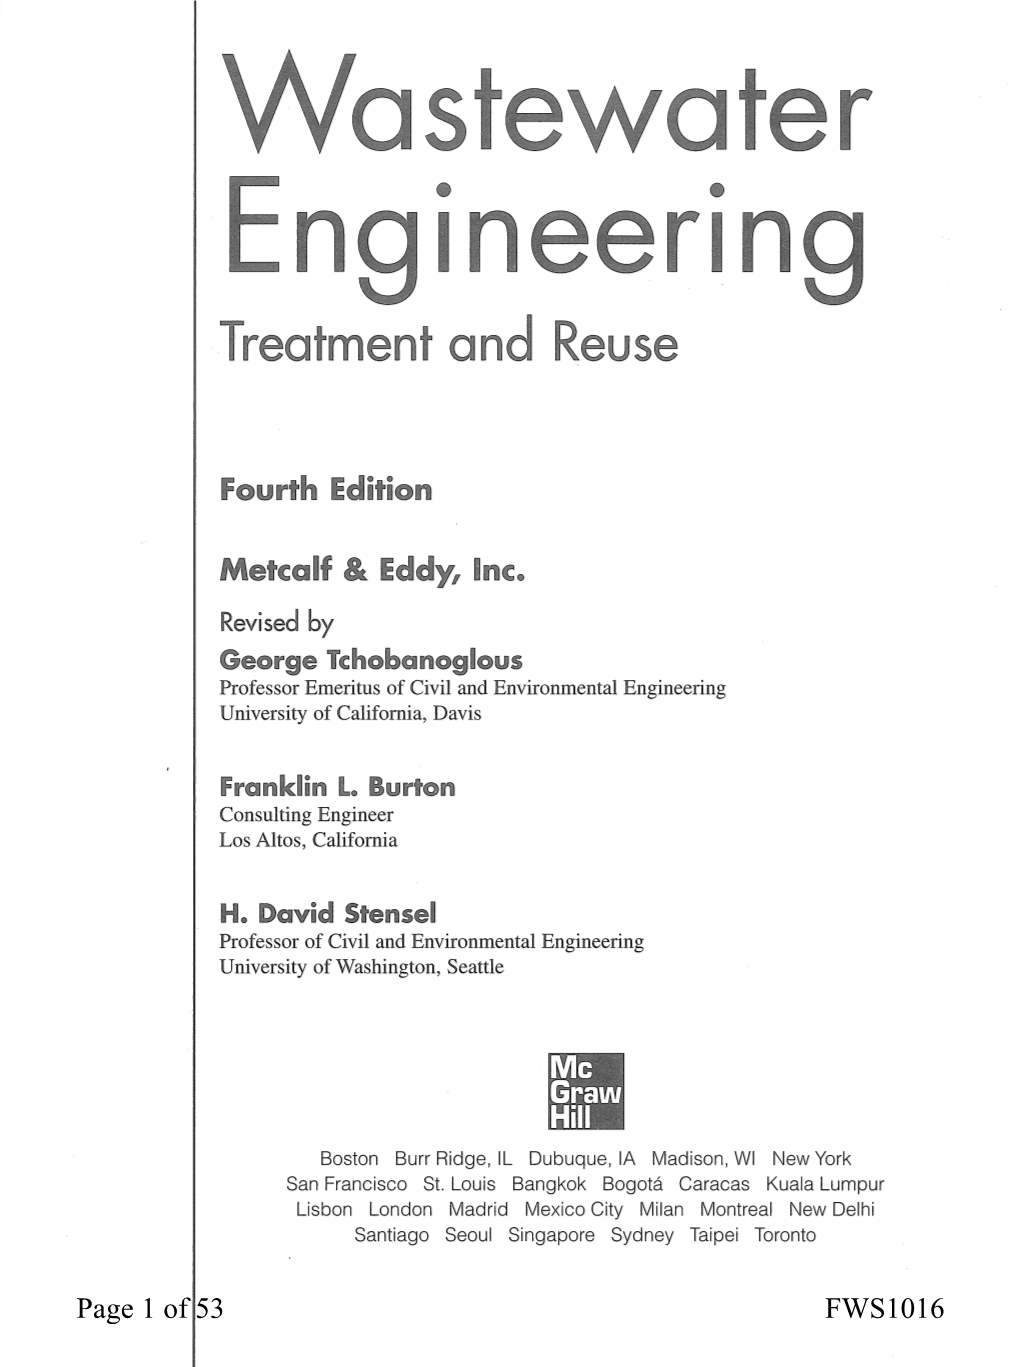 WASTEWATER ENGINEERING, TREATMENT and REUSE FOURTH Edmon